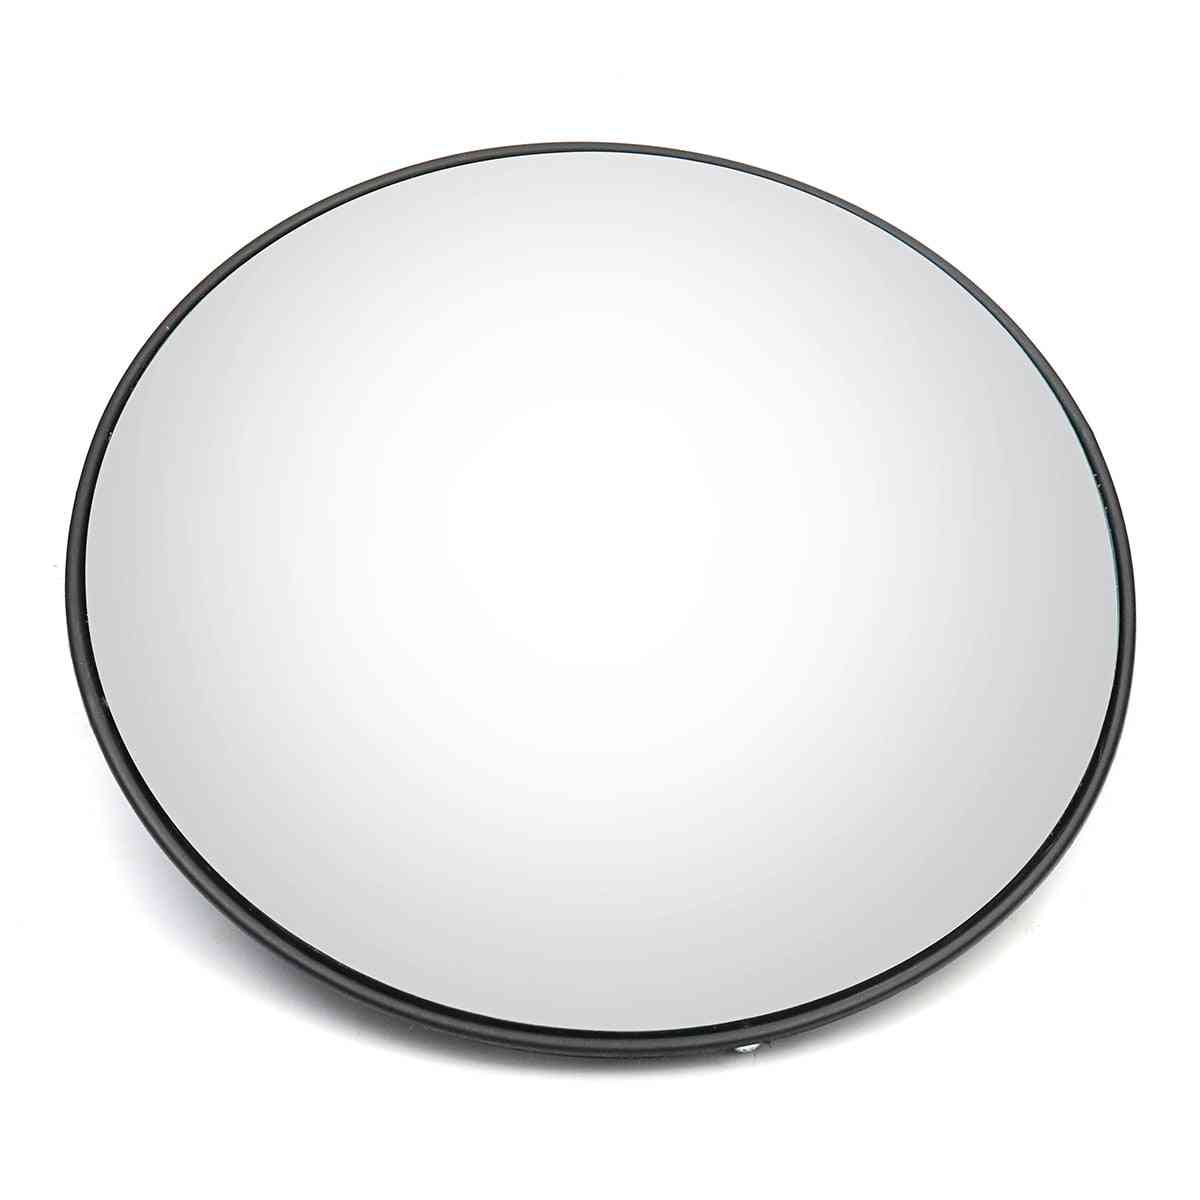 Wide Angle Security Curved Road Mirror For Indoor Burglar, Outdoor Safurance Roadway Safety